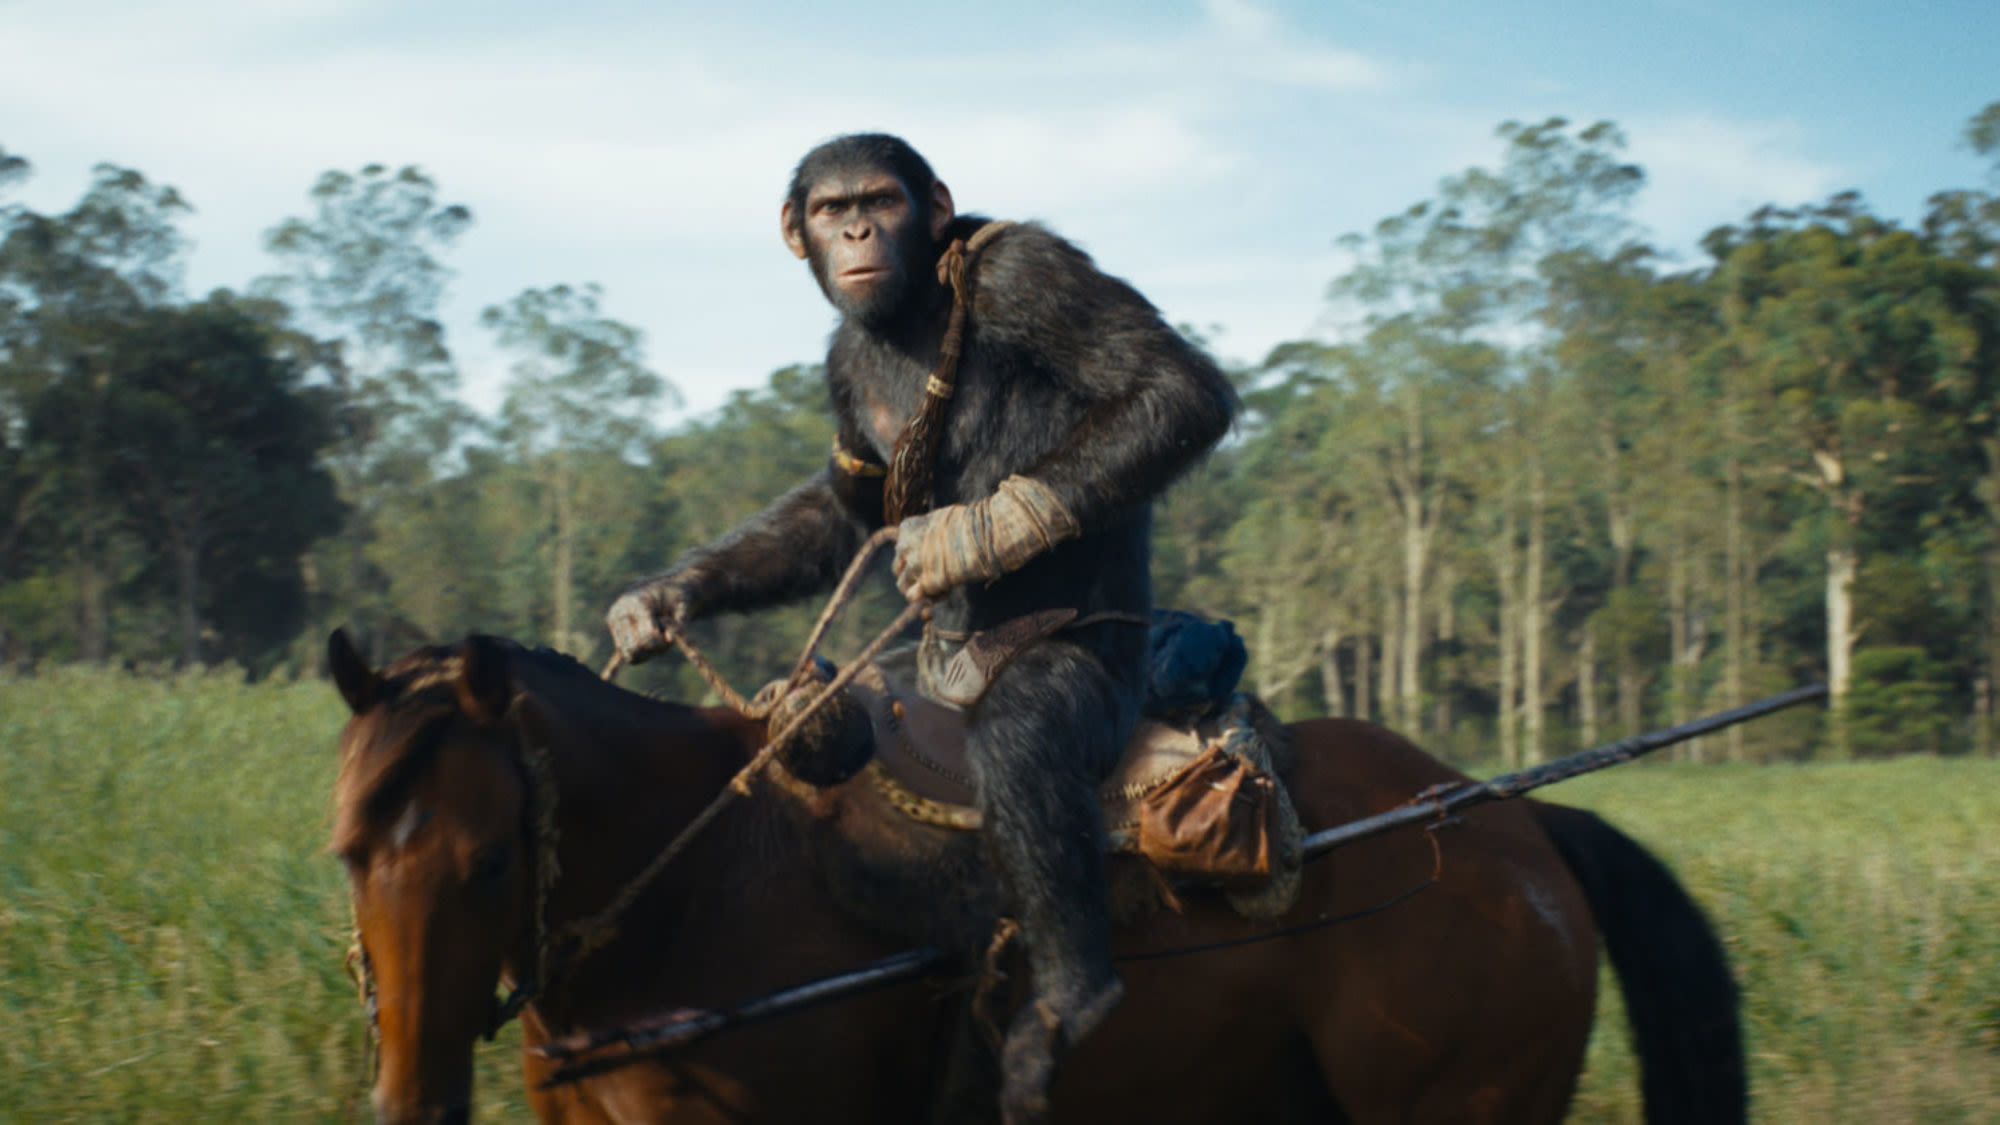 Kingdom Of The Planet Of The Apes Takes Over Weekend Box Office